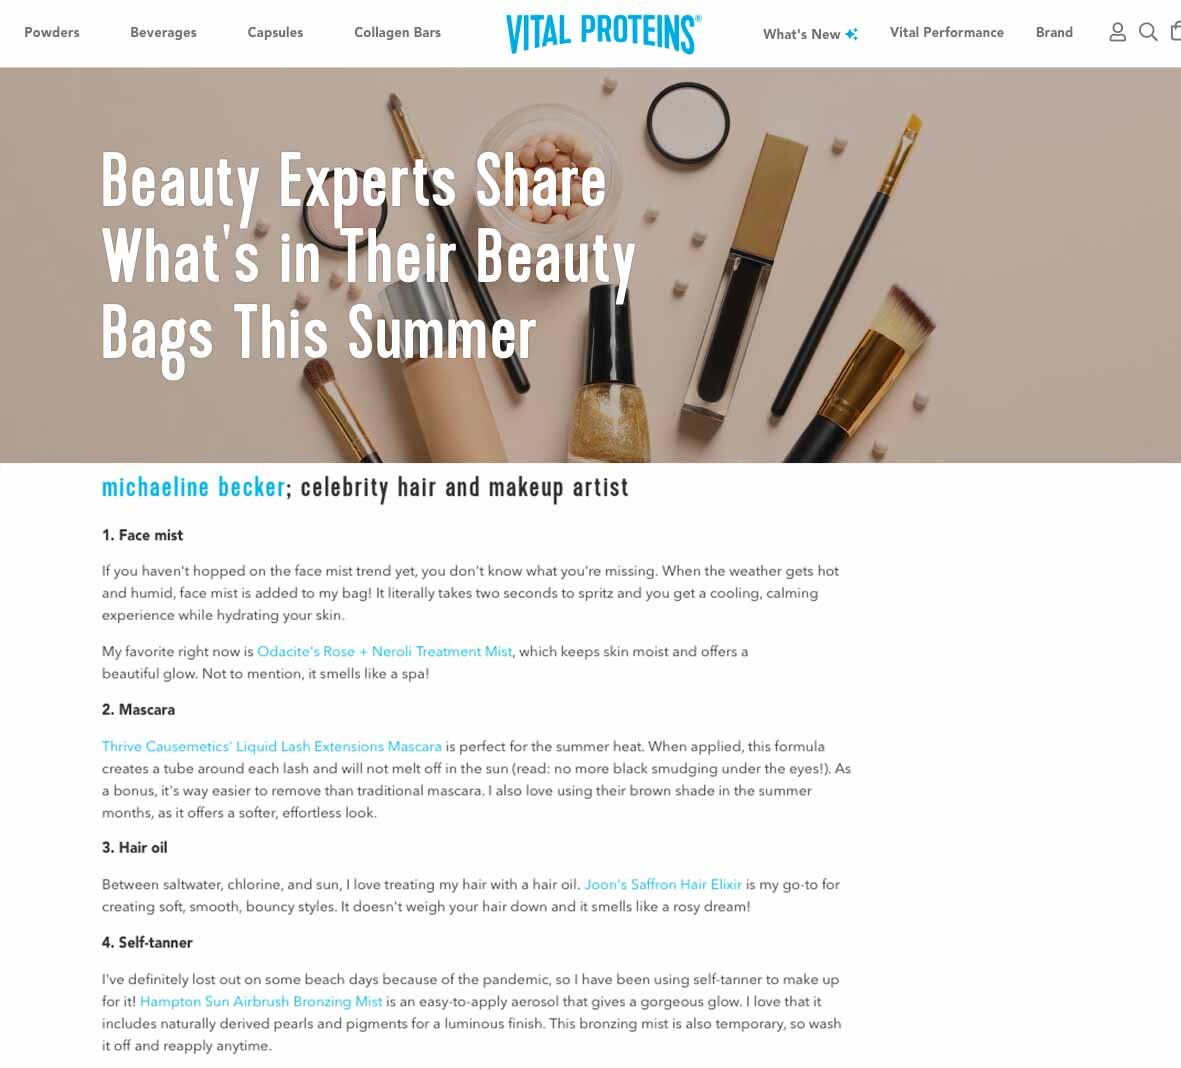 Vital Proteins' // Summer Beauty Bags